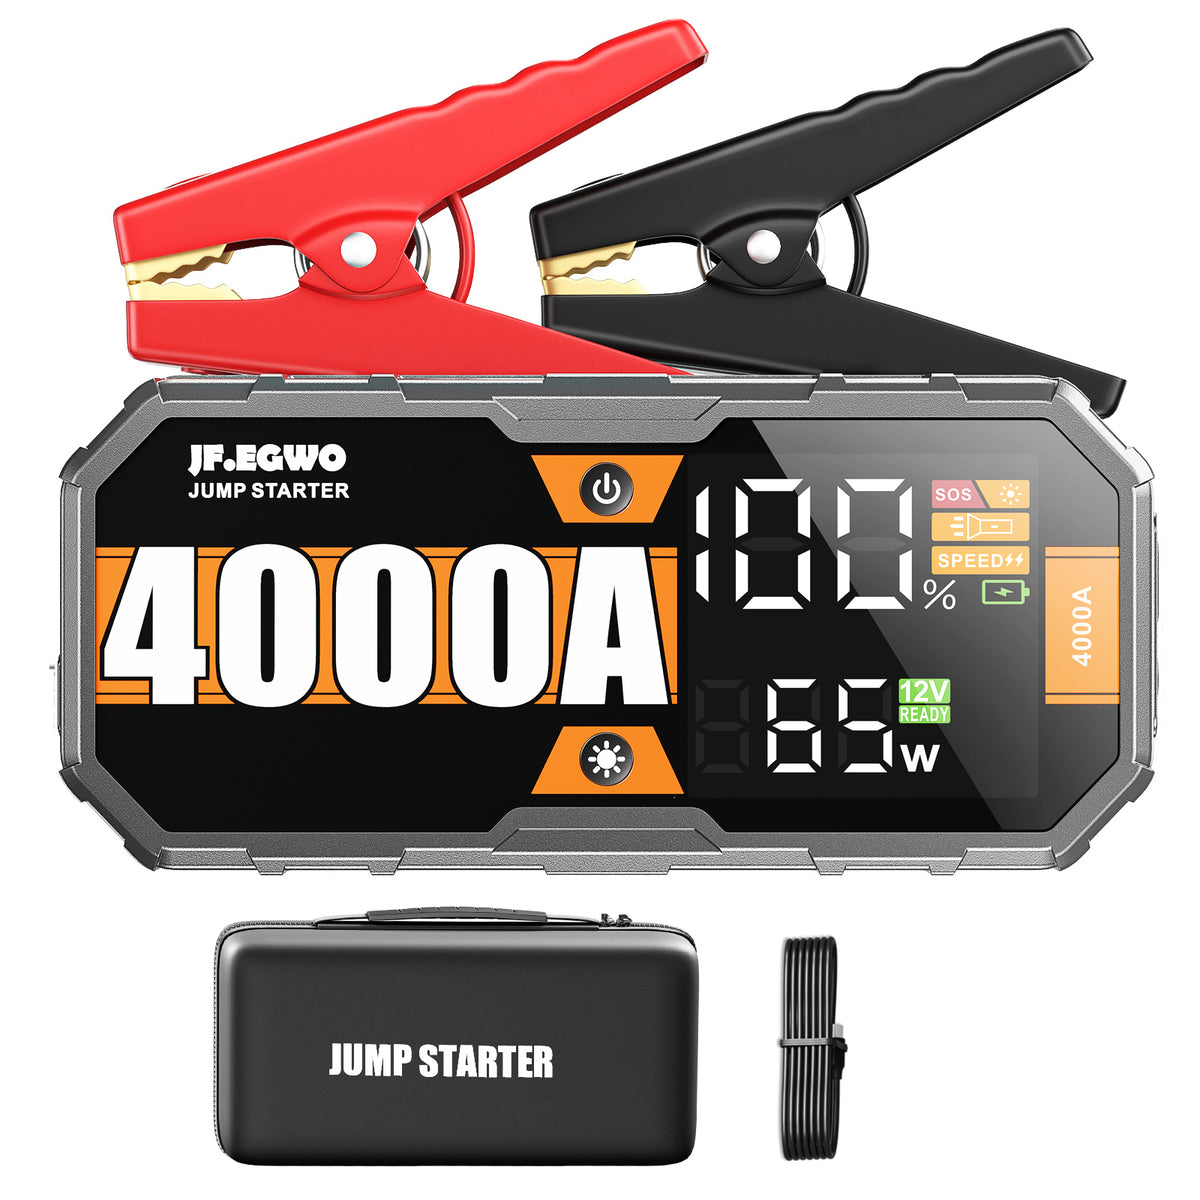 JFEGWO 4000A Jump Starter Car Battery Booster 65W Fast Charging Total 230W Power Bank, Pro